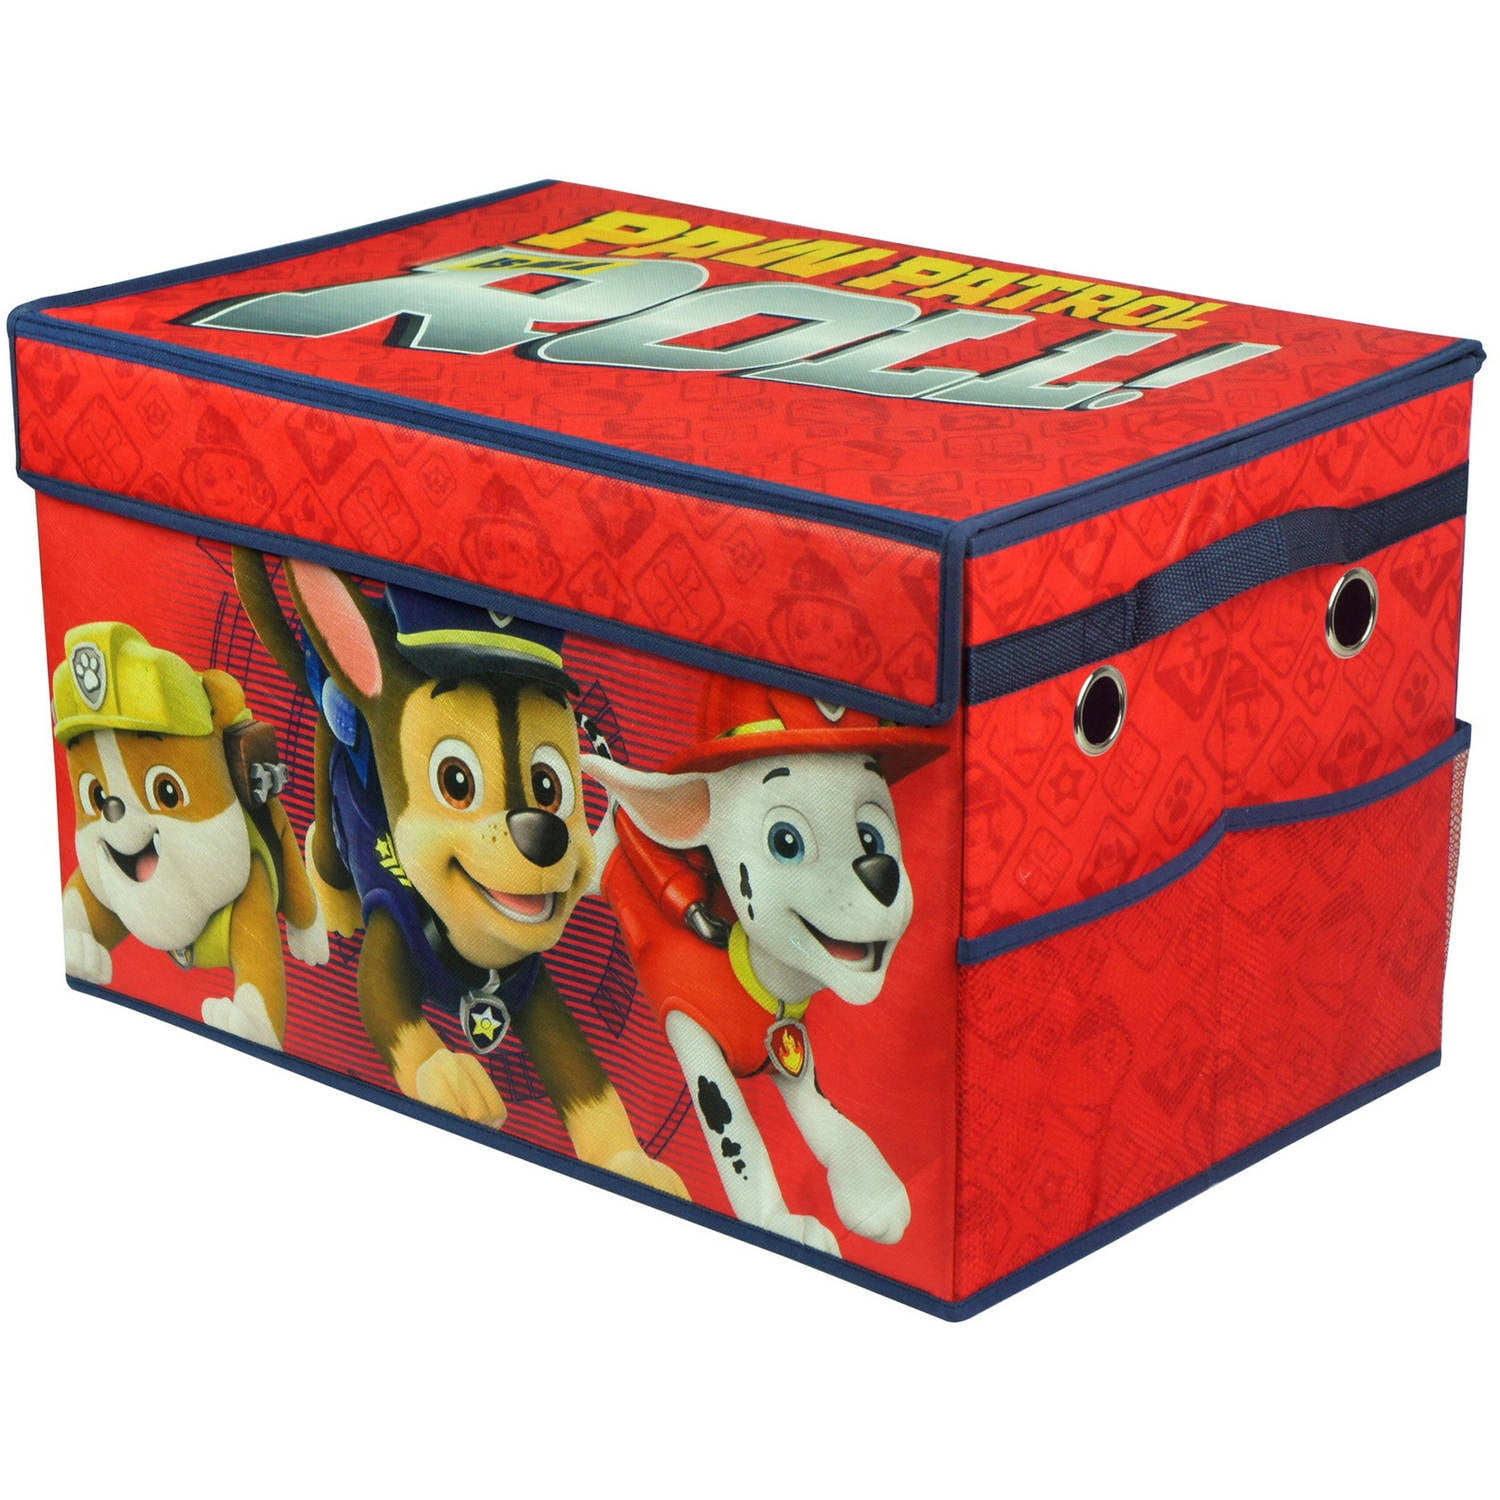 Paw Patrol Oversized Soft Collapsible Storage Toy Trunk 